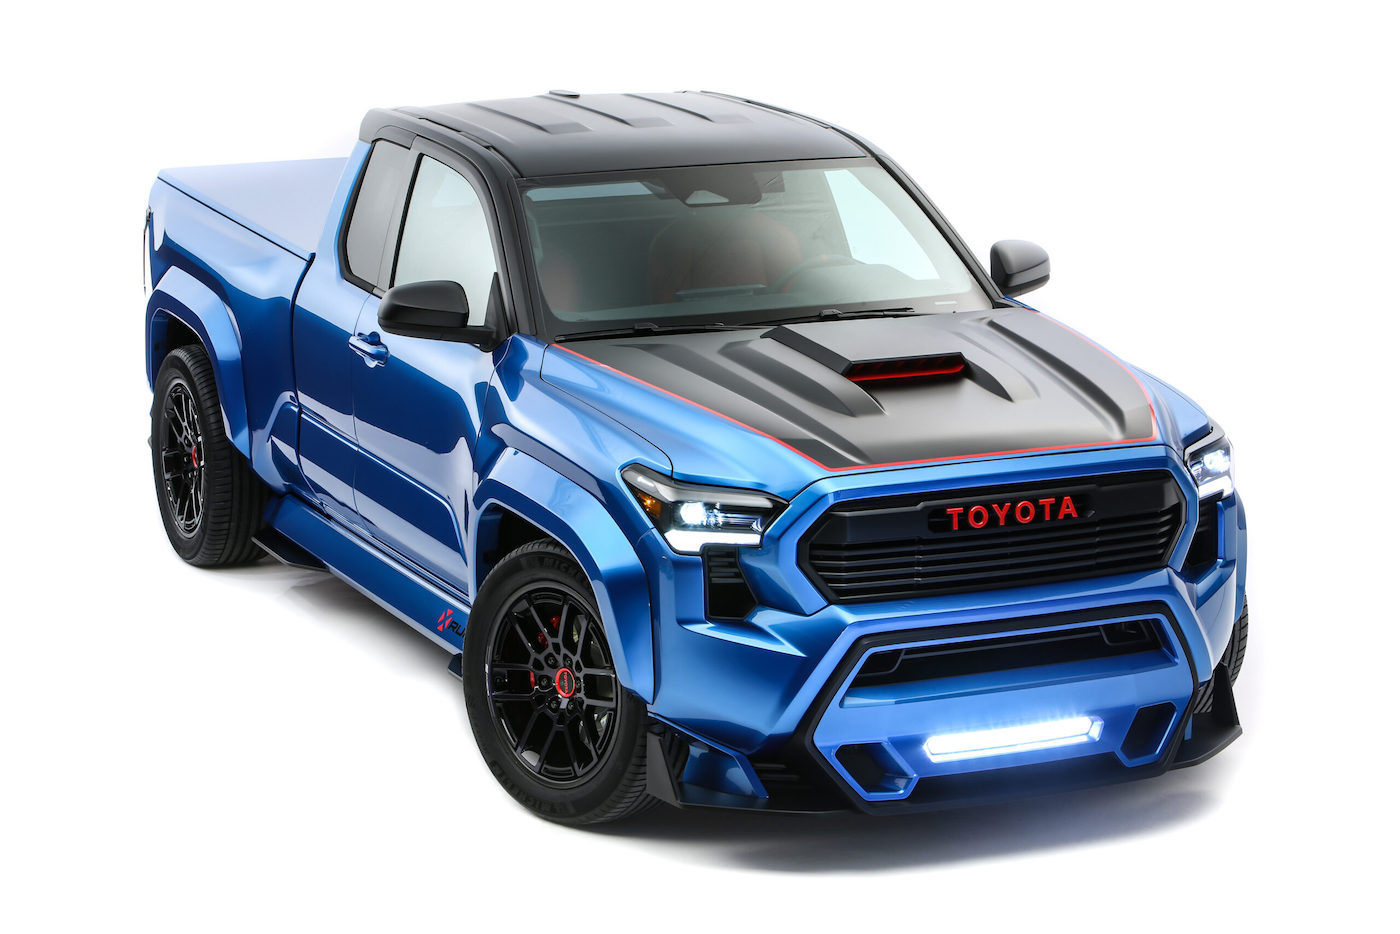 2024 Tacoma 2024 Tacoma X-Runner Concept Envisions Sport Truck with TRD Performance Package Upgrades Tacoma_X_Runner_Concept_Toyota_SEMA_2023_Hi-Res_5-scaled